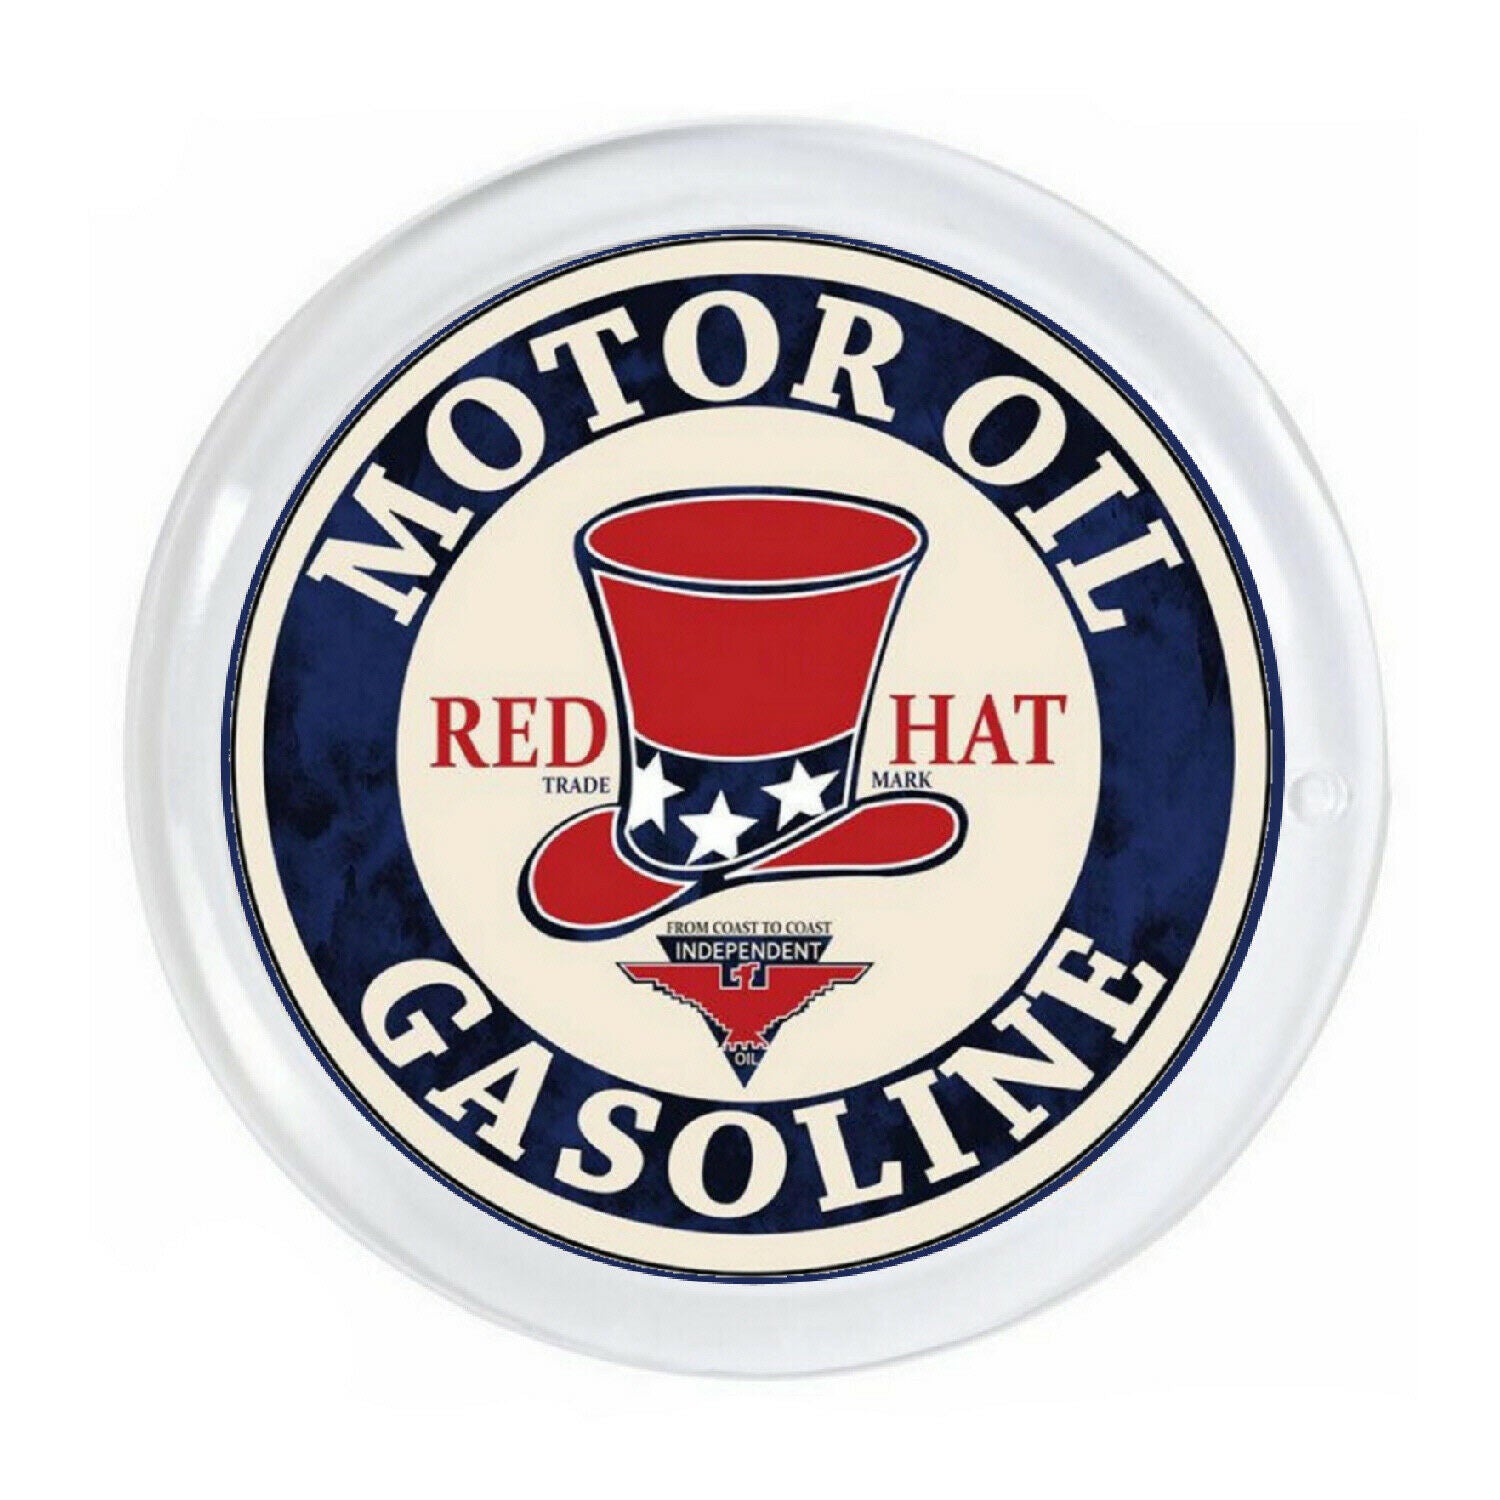 Red Hat Oil Magnet big round almost 3 inch diameter with border.